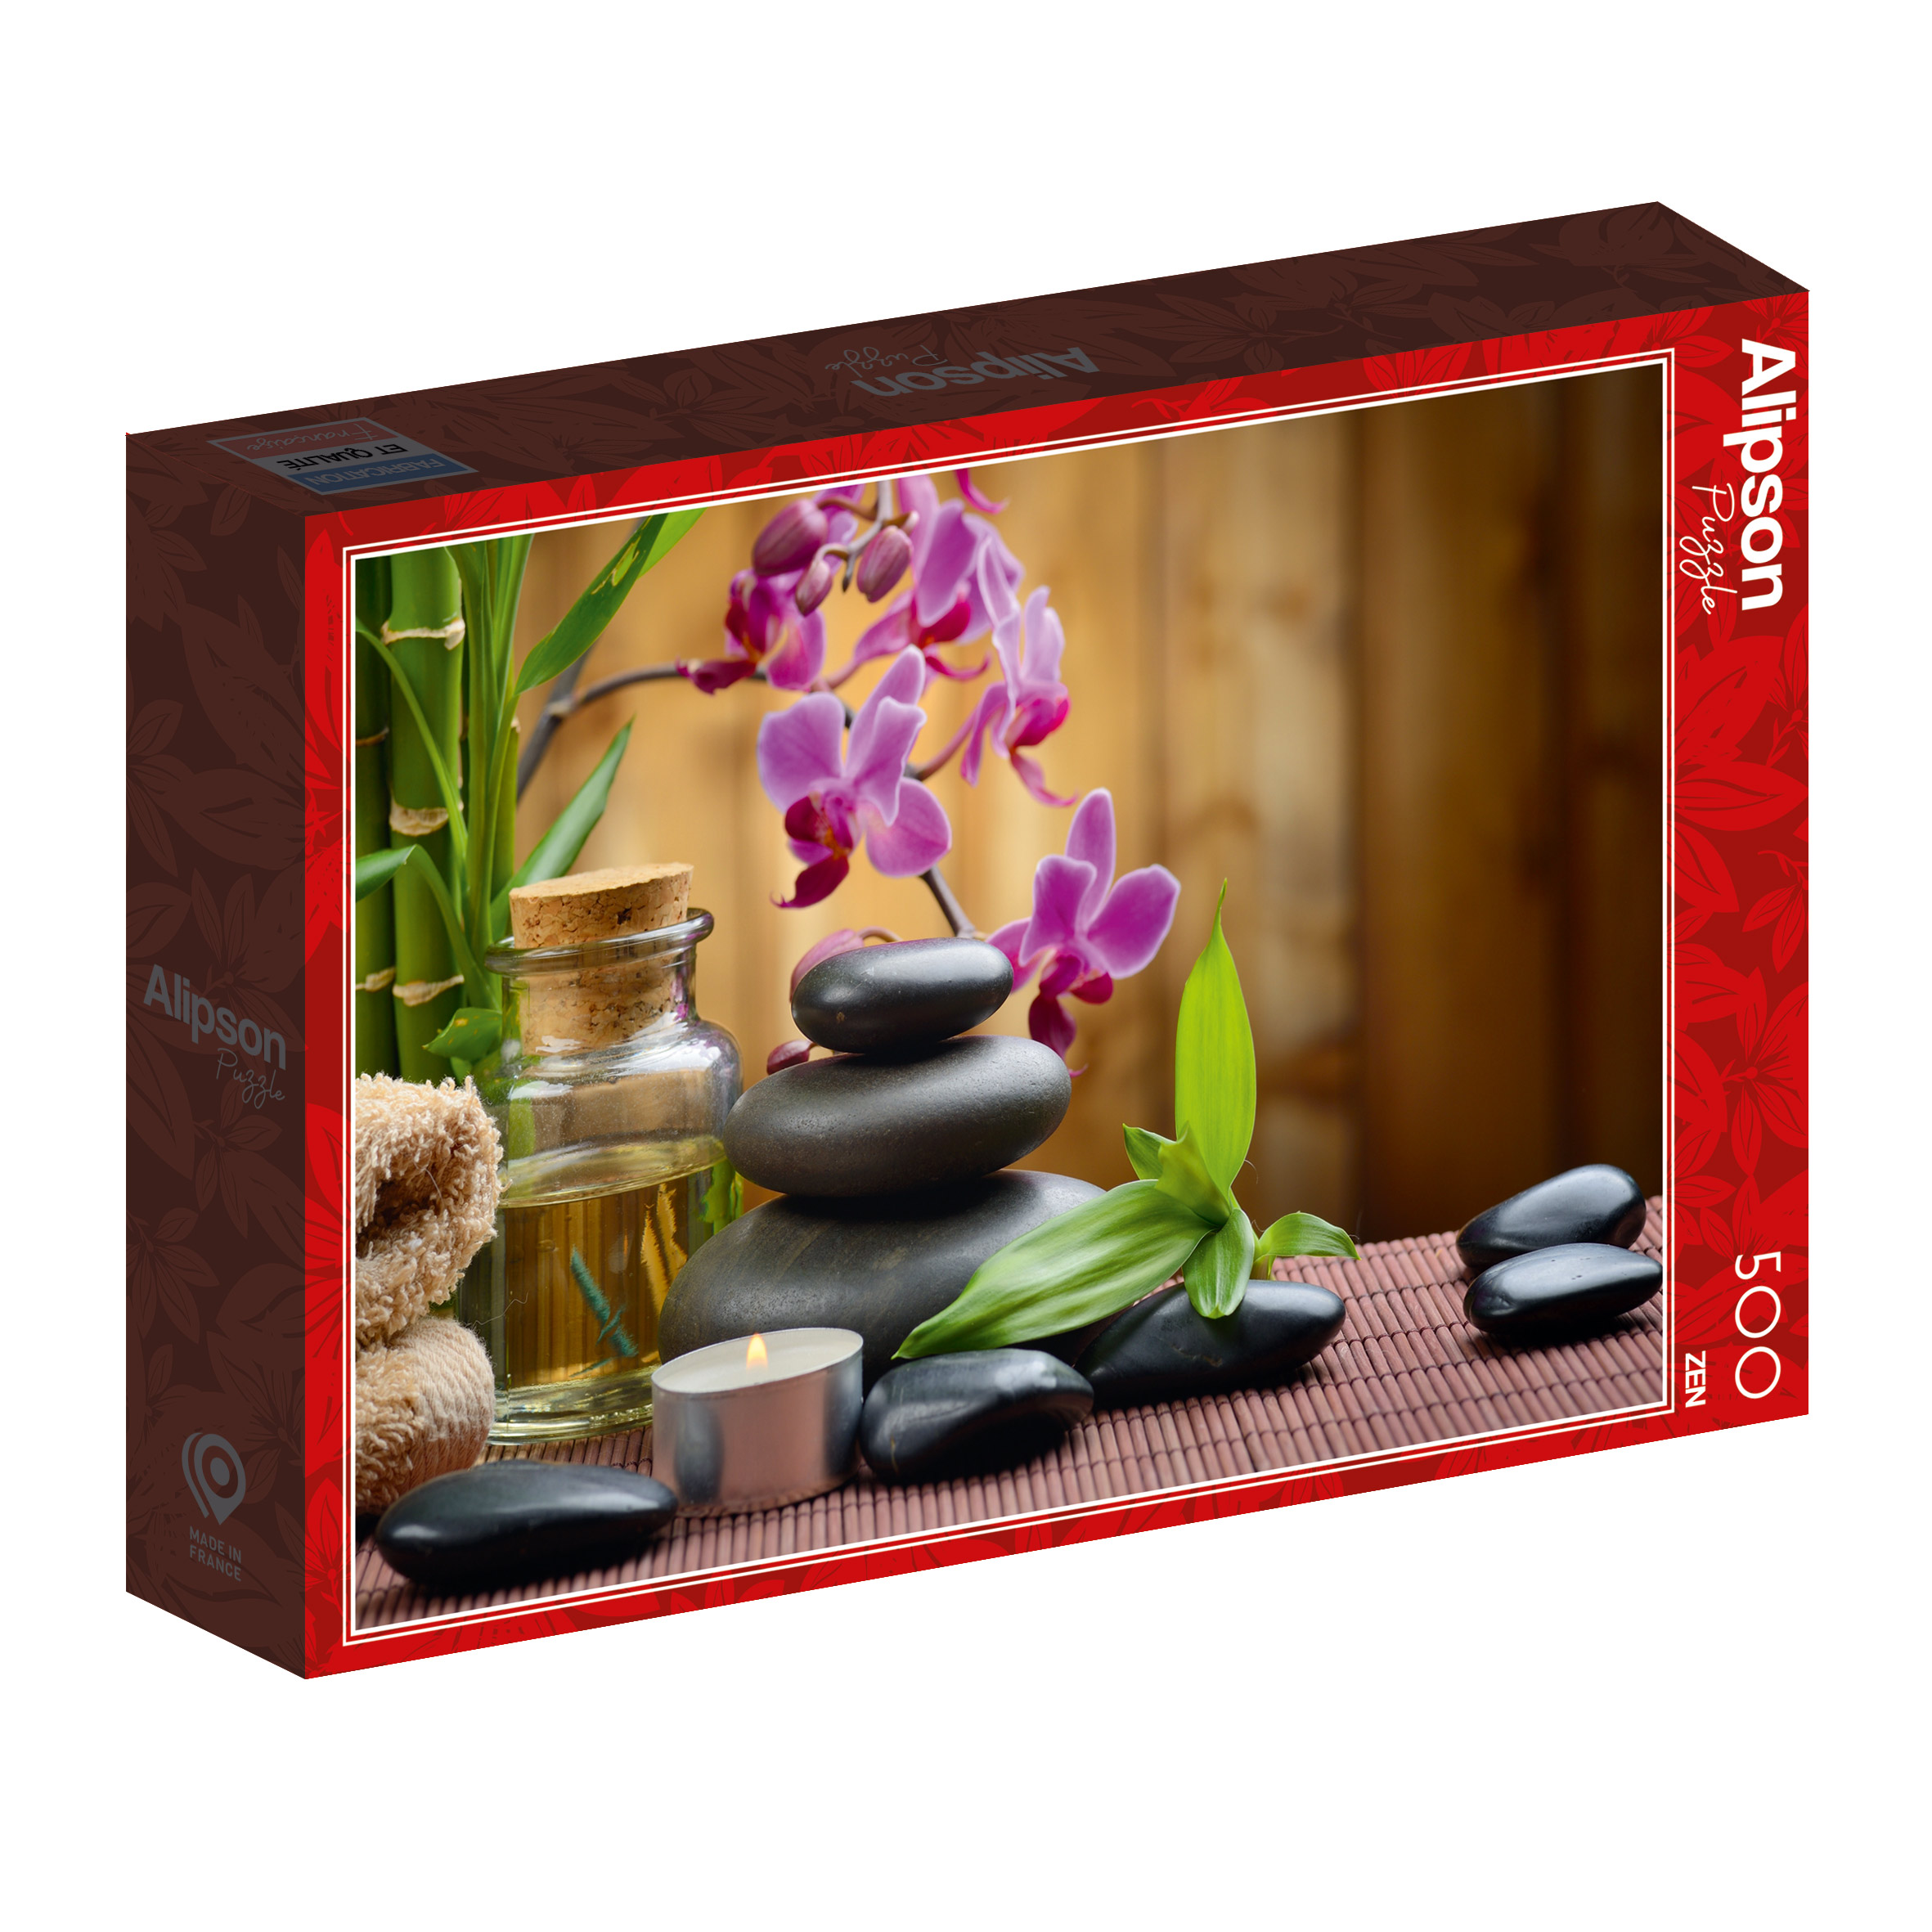 Puzzle Zen Alipson-Puzzle-50001 500 pieces Jigsaw Puzzles - Deco and  Objects - Jigsaw Puzzle